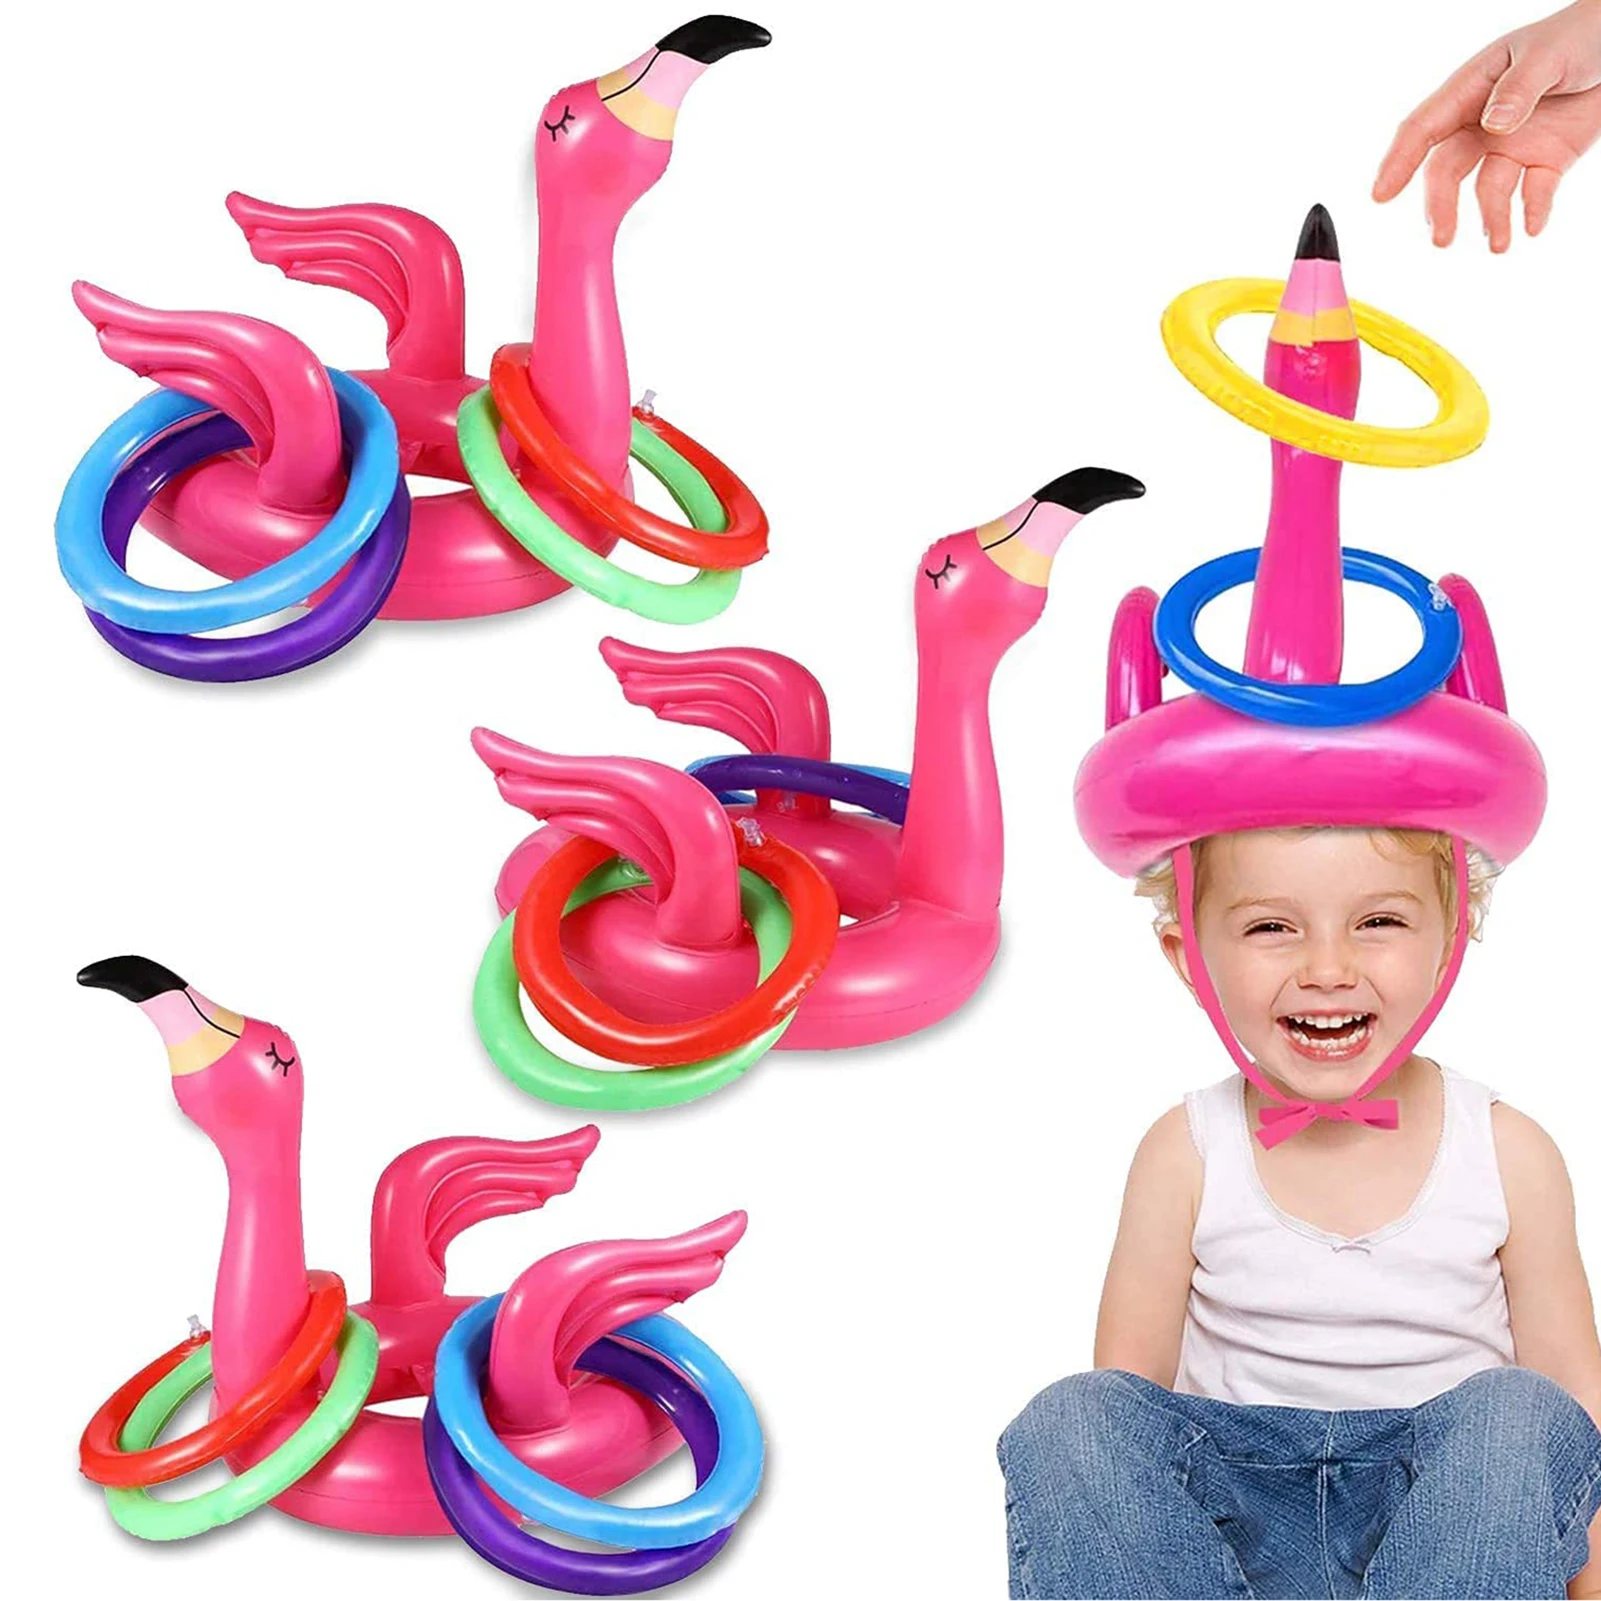 Portable Iatable Flamingo Head Hat With 4Pcs Toss Rings Water Game For Family Party Pink PVC Material Outdoor Pools Fun Toys cable access kits 60cm rods with hook rings led light magnet chain cable puller push pull rod sanke rod wire puller